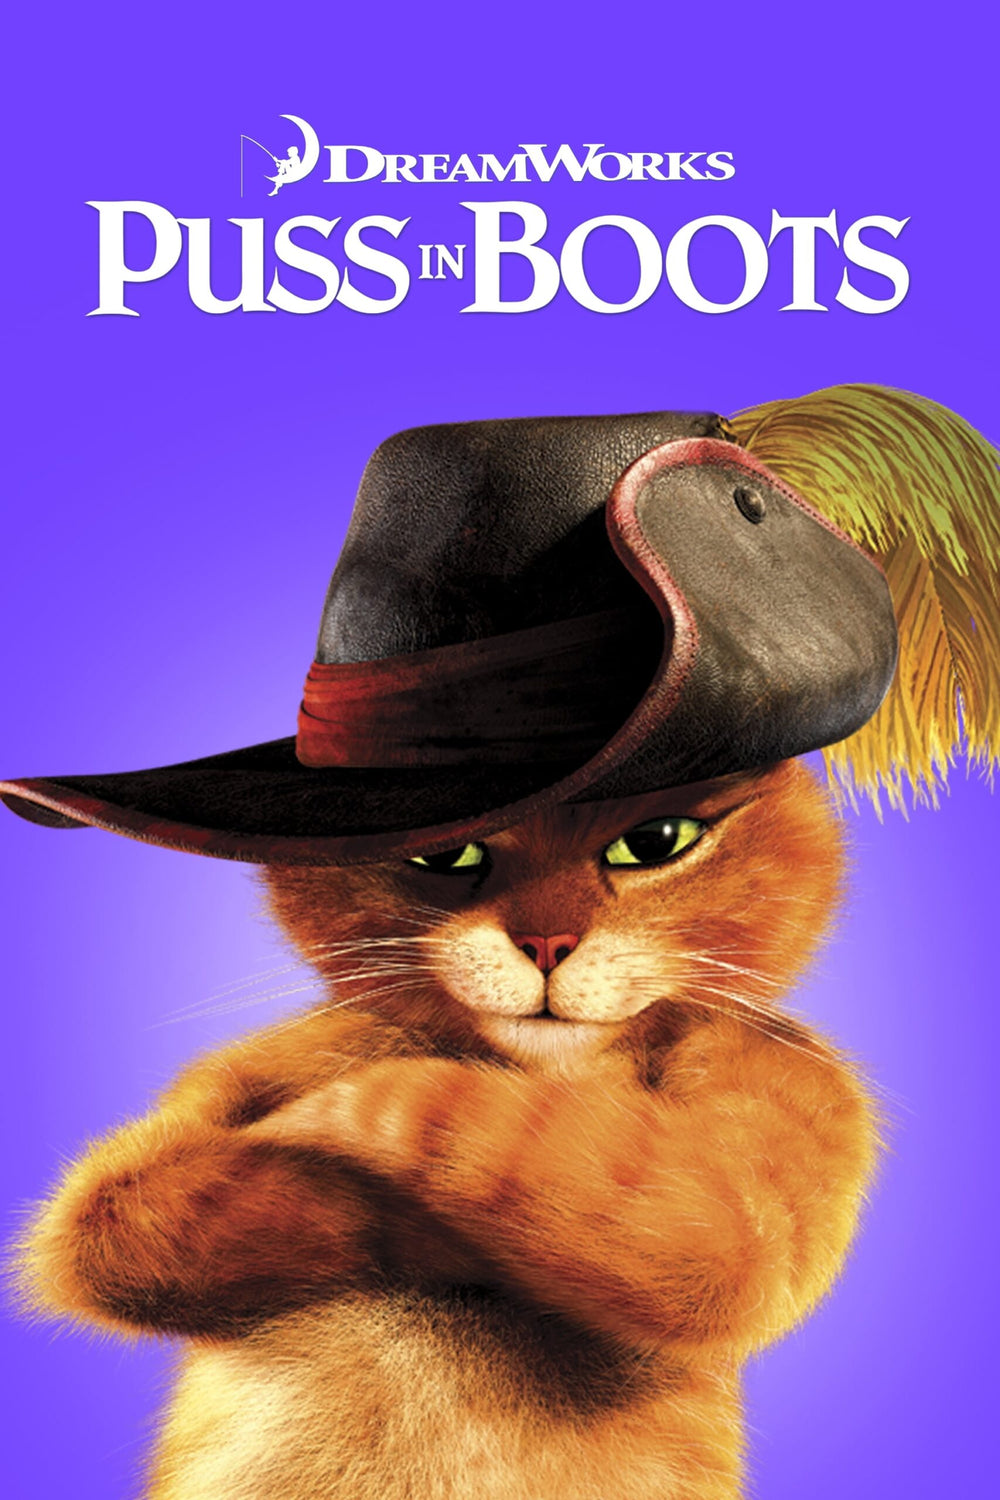 Puss in the Boots 2011 4K Vudu/Itunes via Moviesanywhere